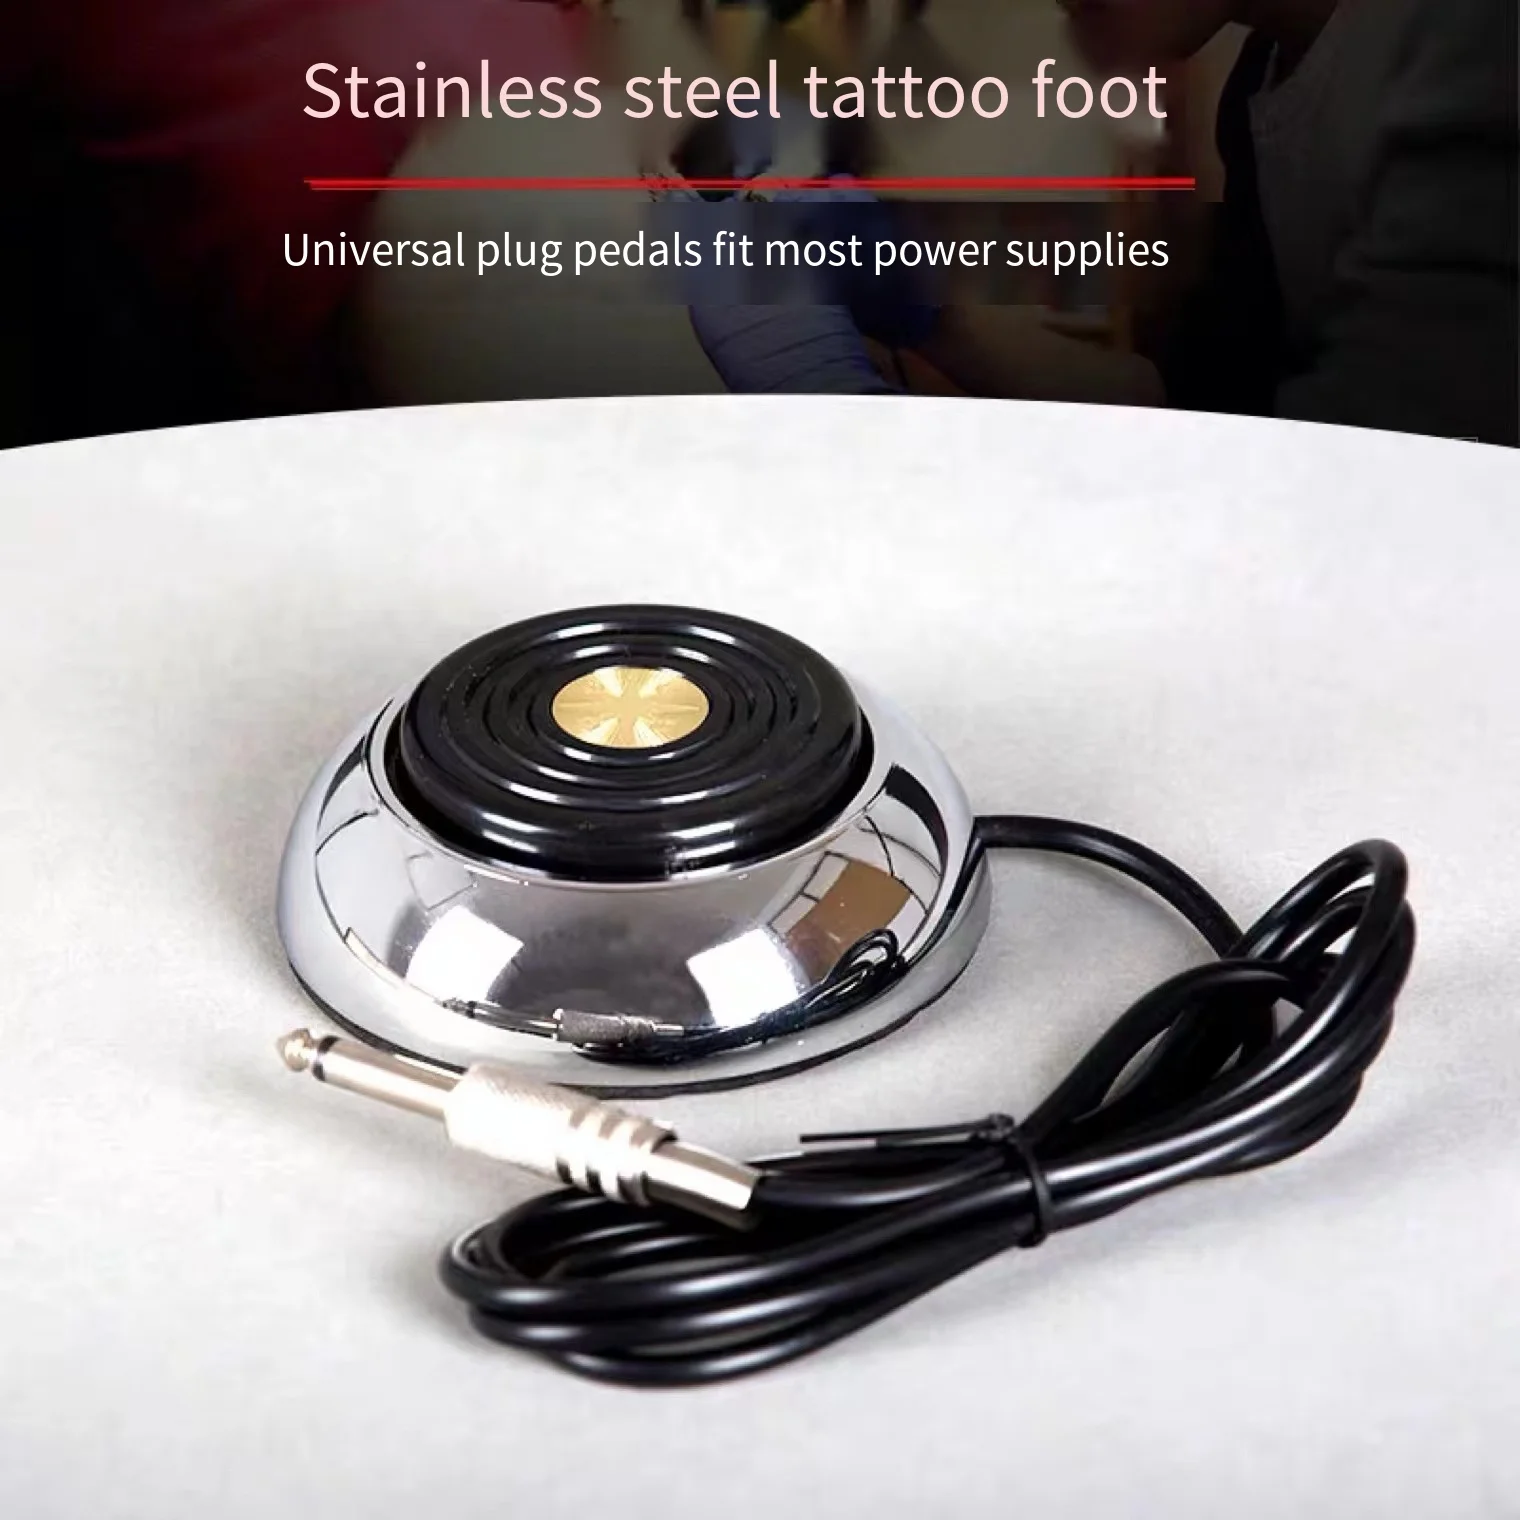 360° Tattoo Foot Pedal Multi-Angle Weighted Tattoo Machine Power Supply Pedal Switch Tattoo Equipment Voltage Regulator Makeup